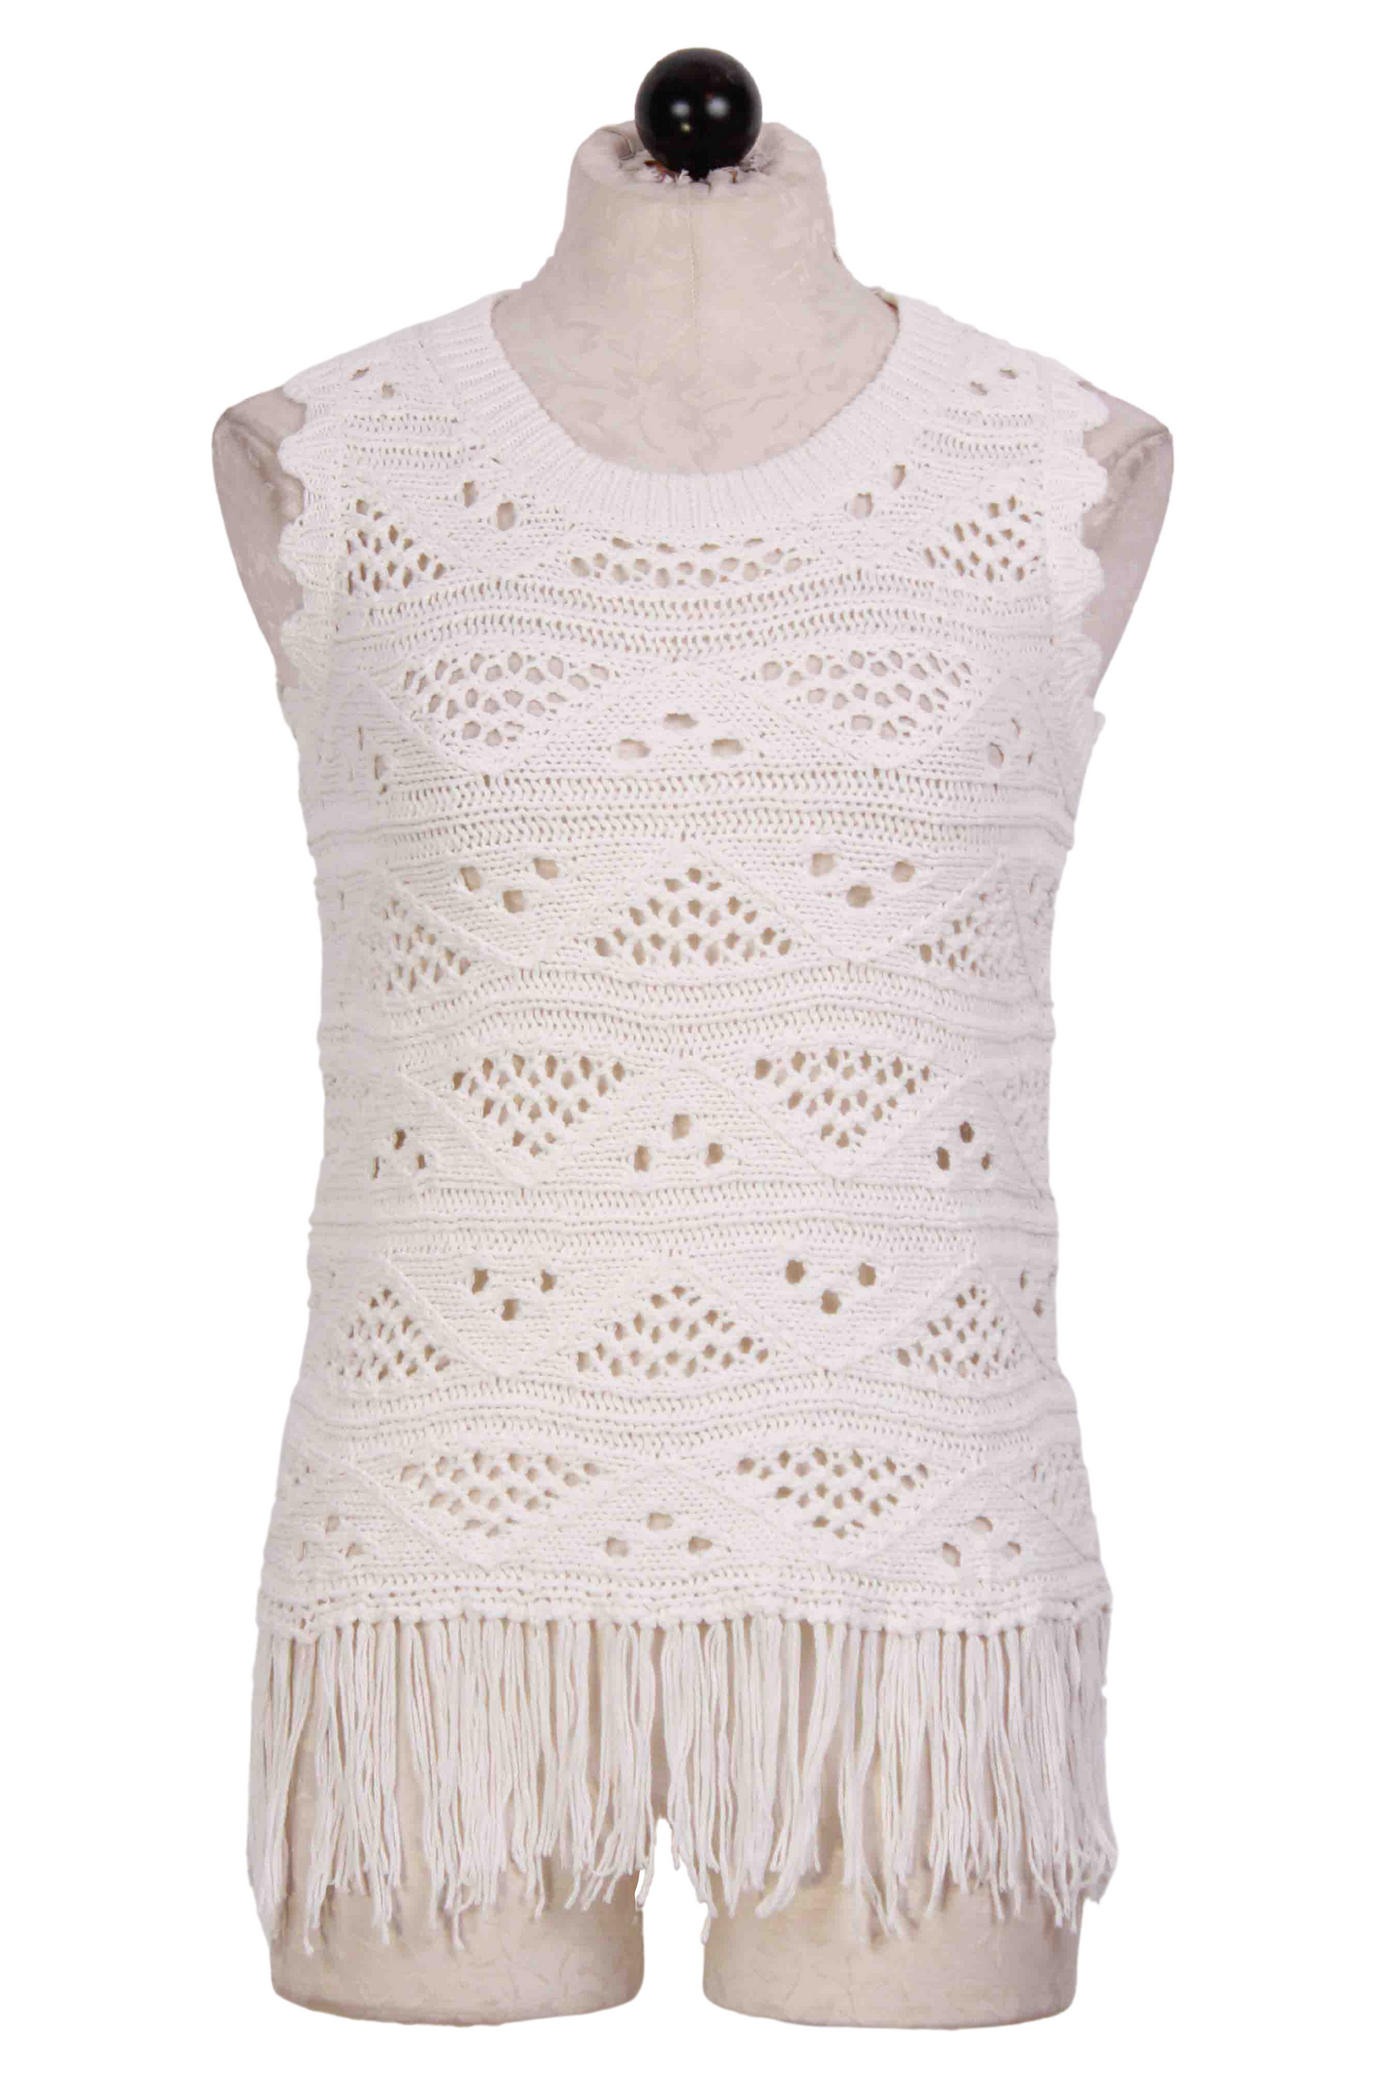 Off White Bodhi Fringed Crocheted Vest by Another Love